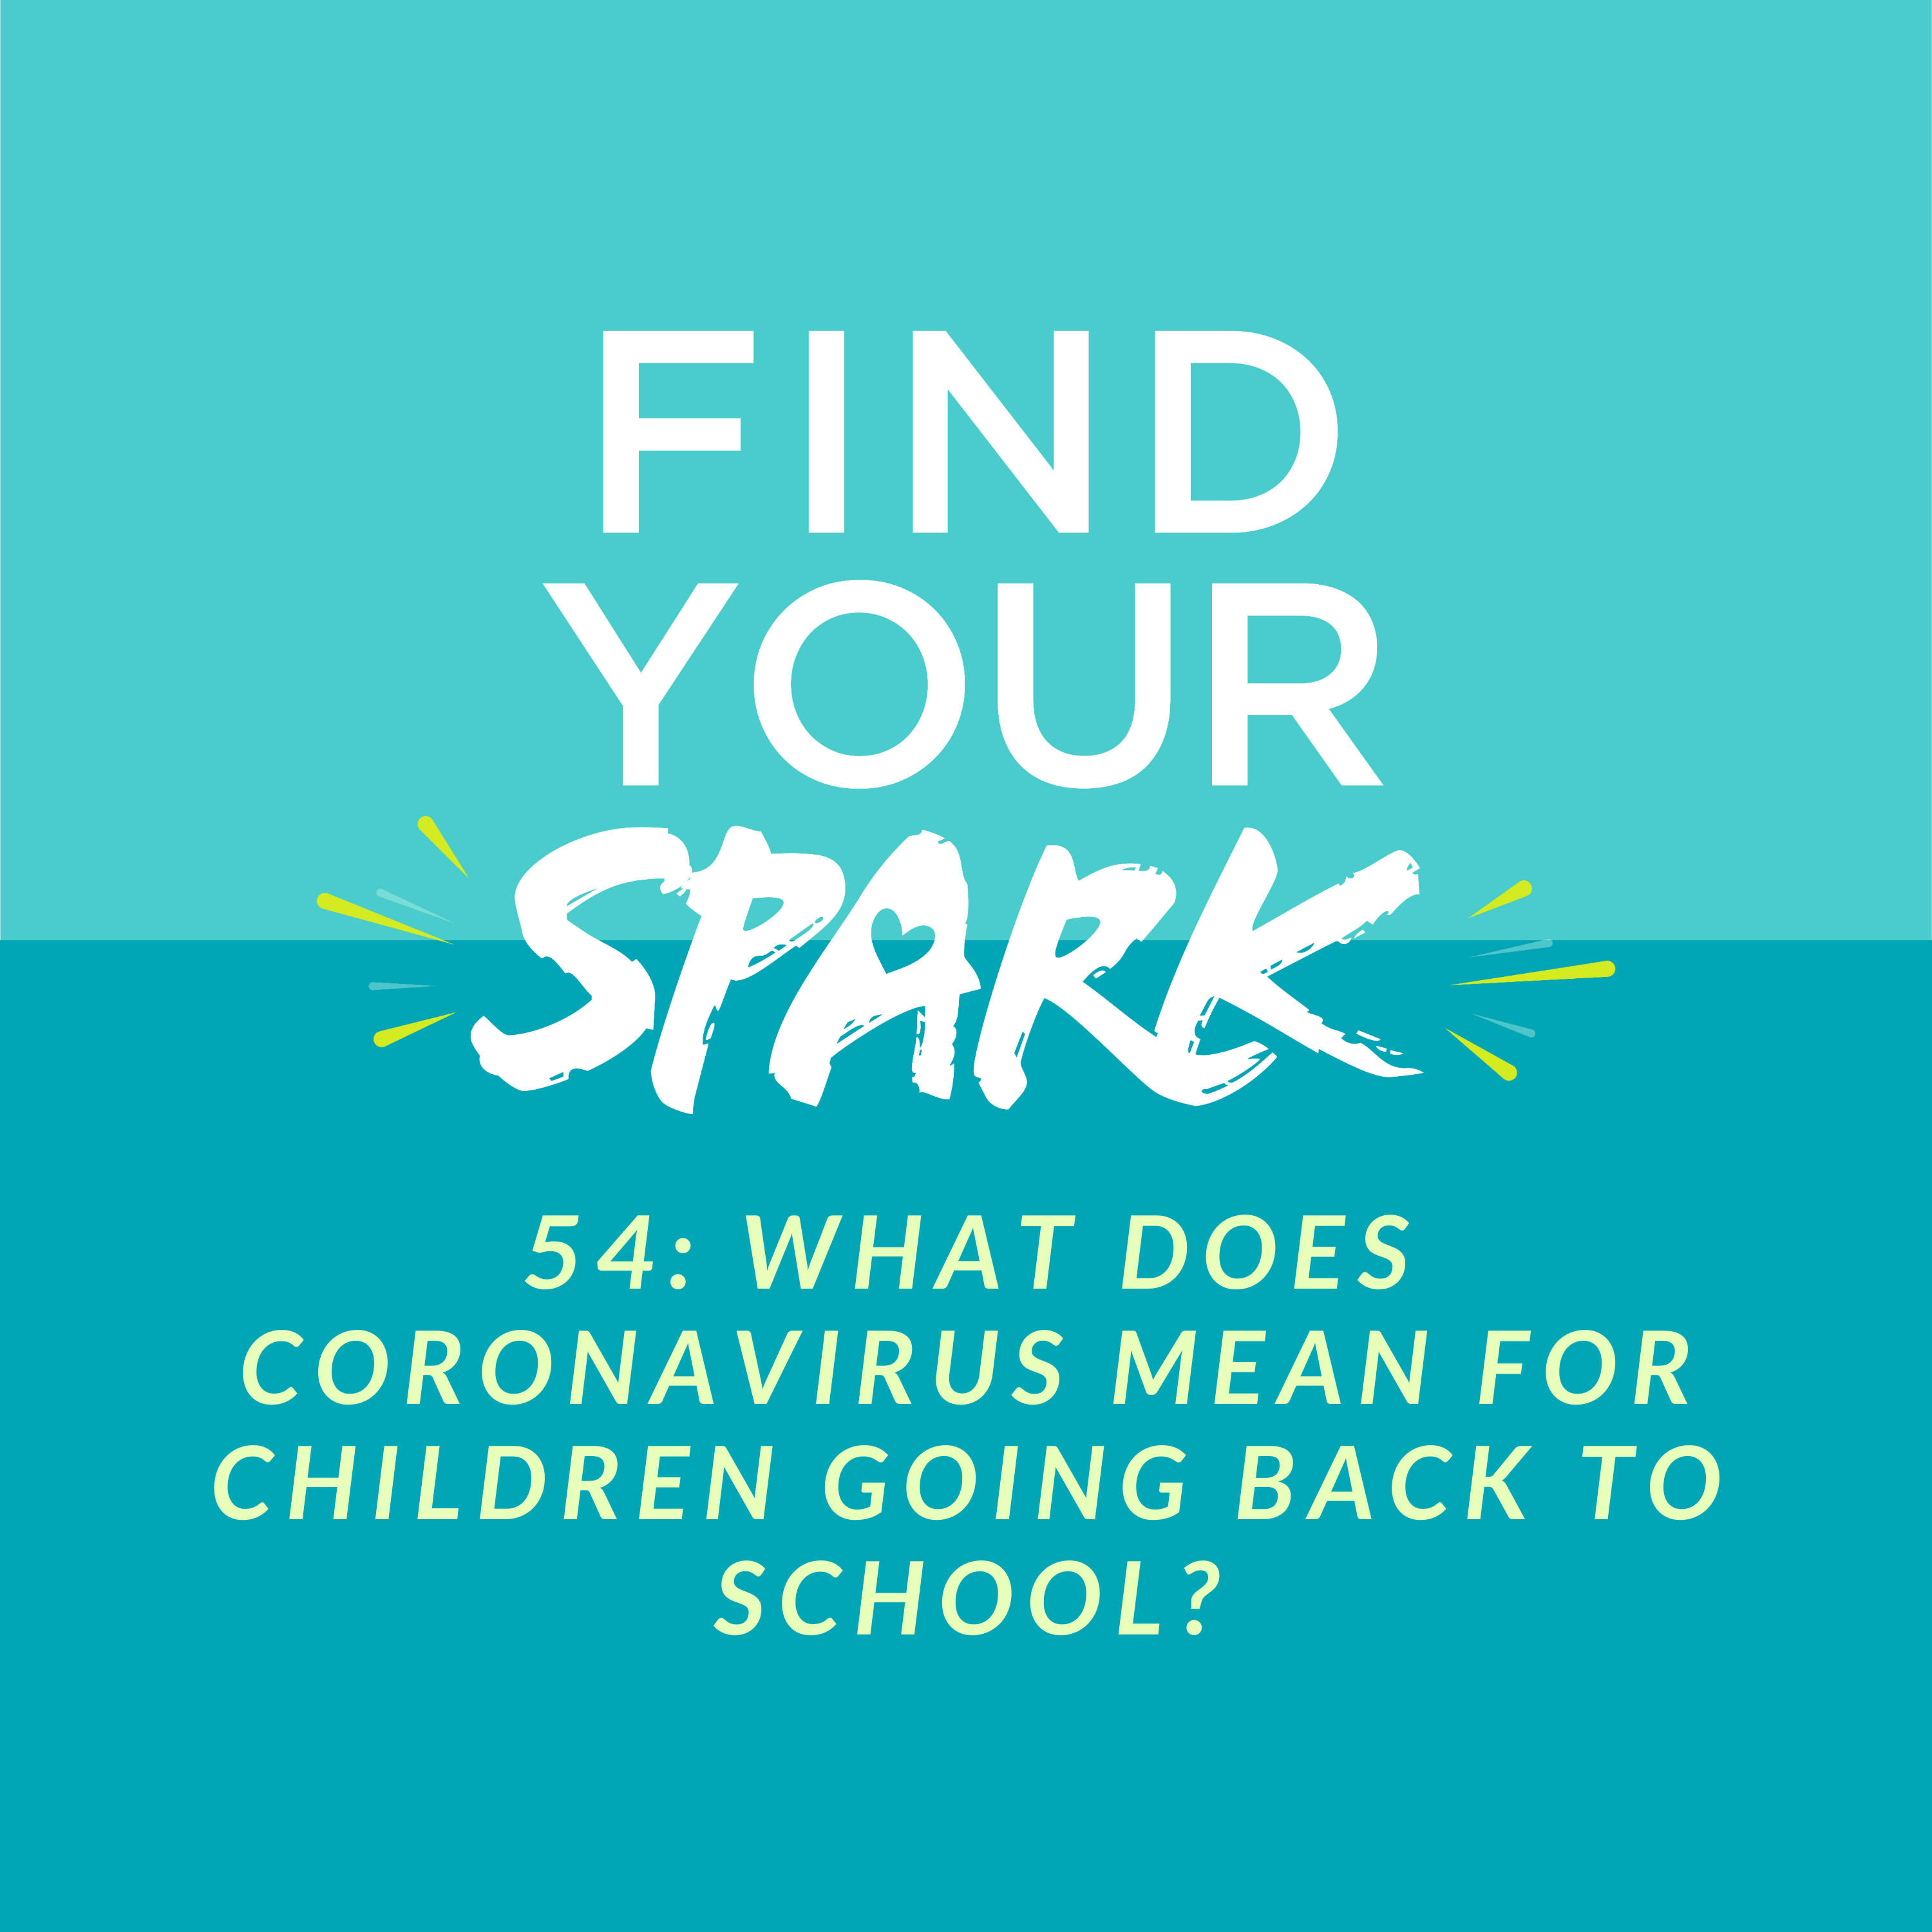 54: What Does Coronavirus Mean for Children Going Back to School?